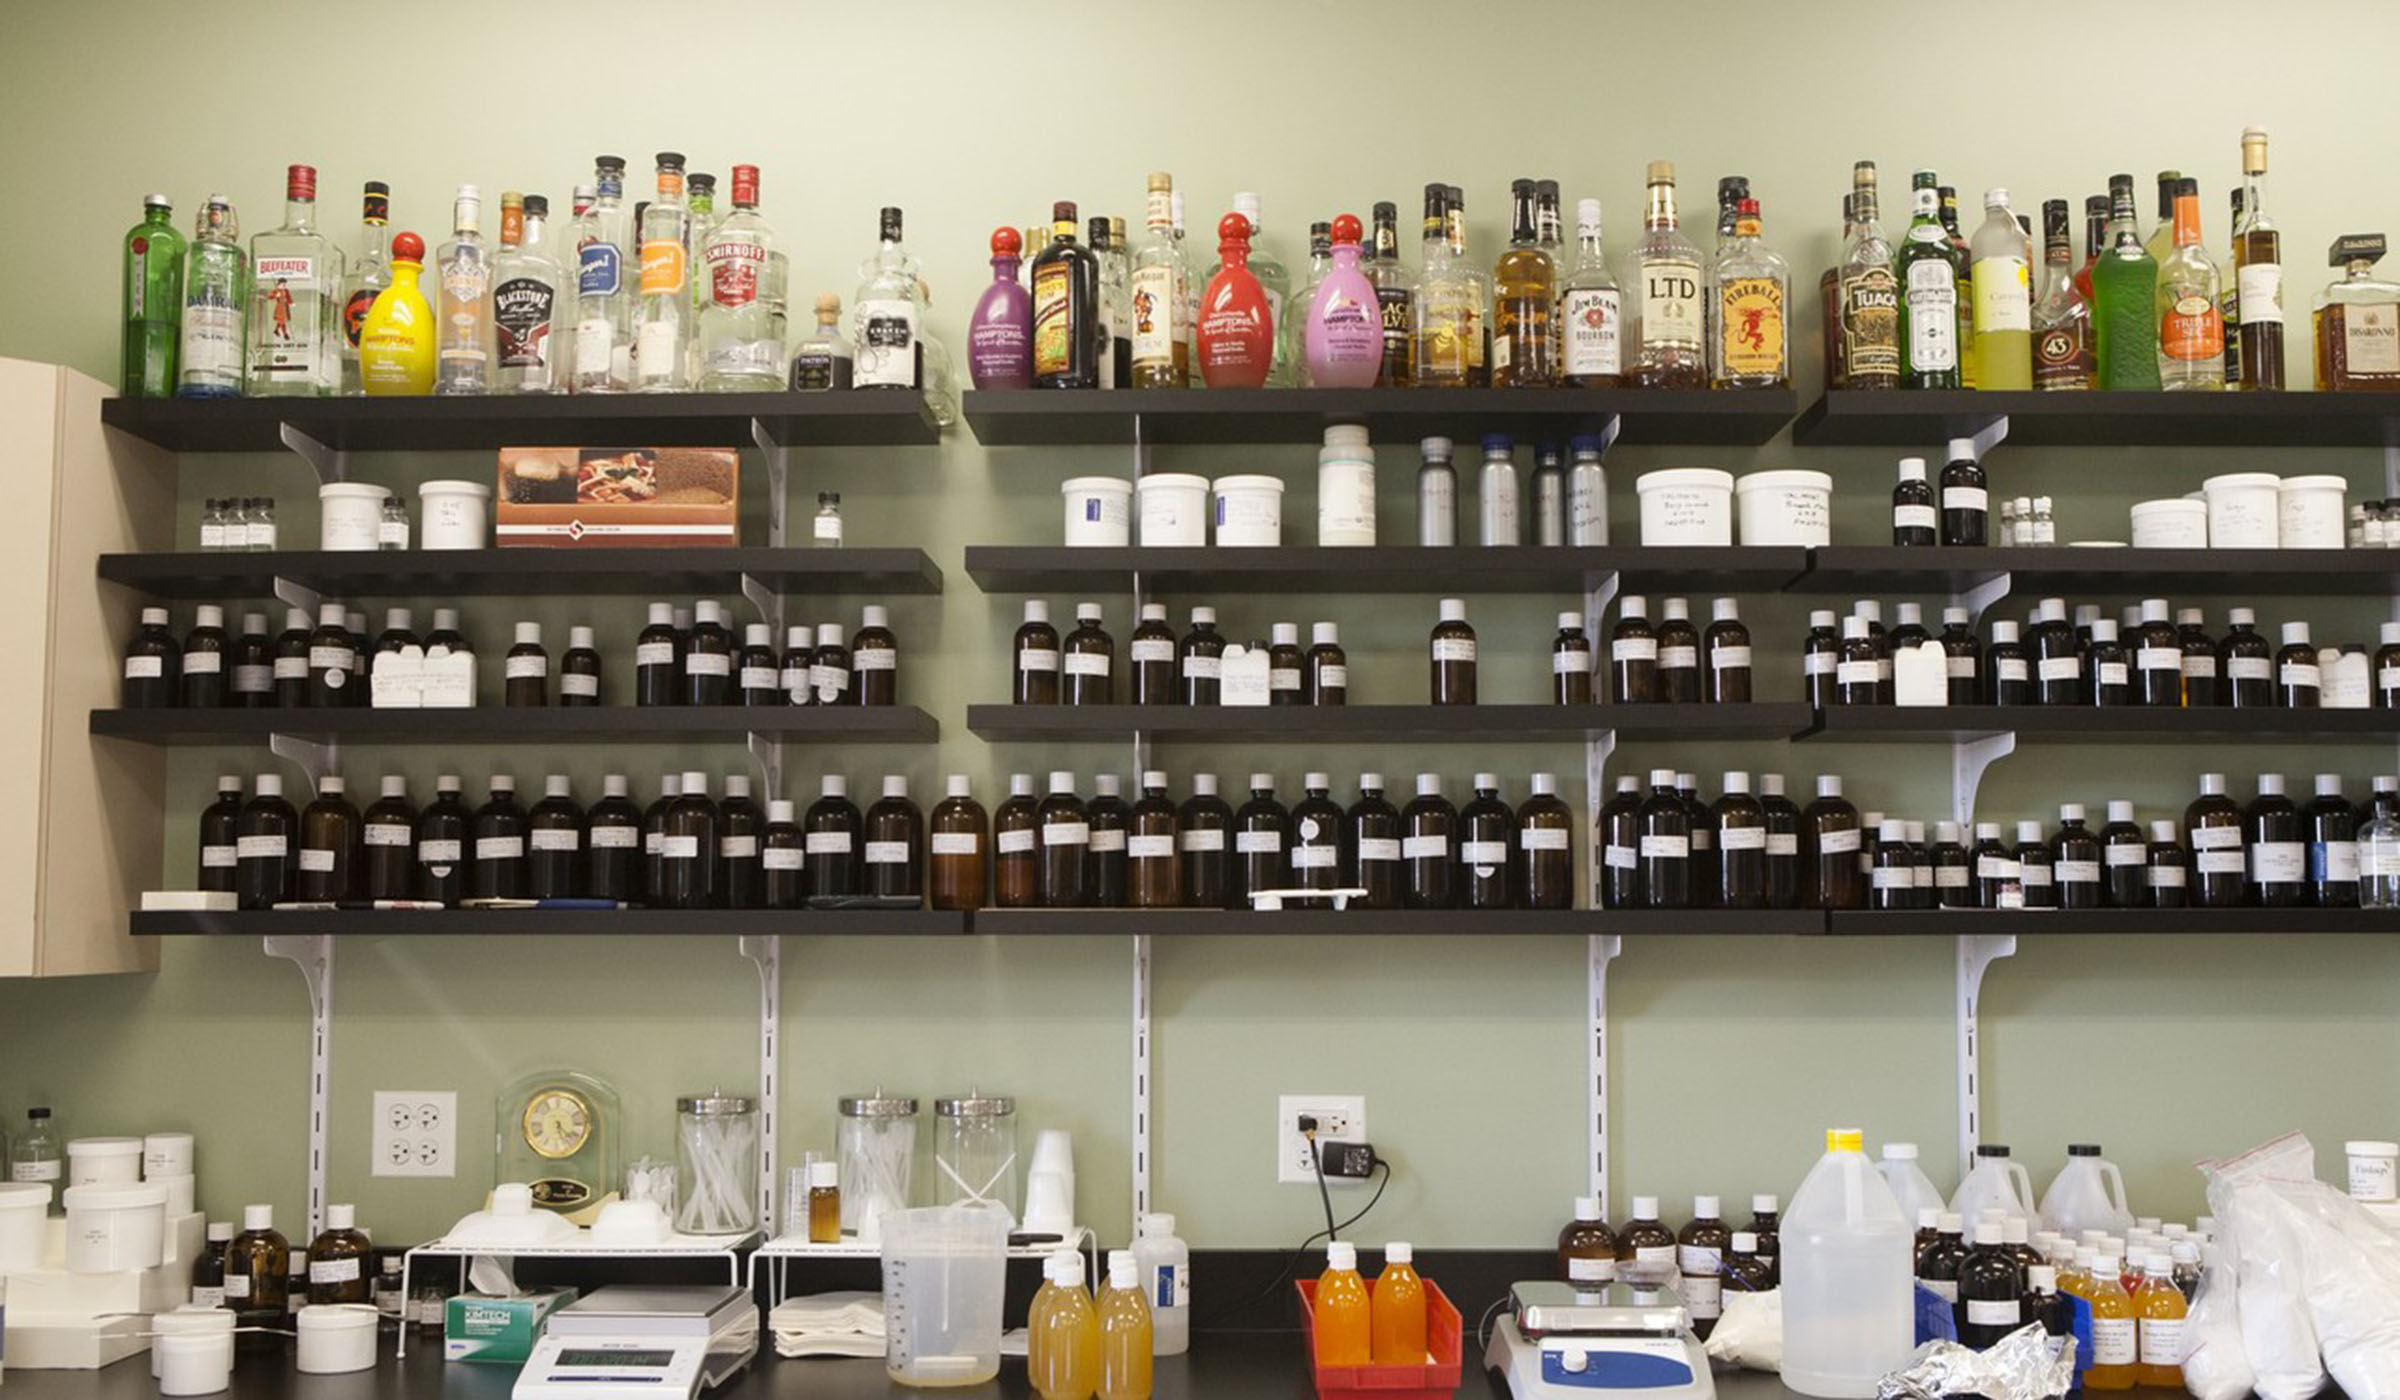 An assortment of beverages, alcoholic drinks and medicines in a laboratory. Net photo.